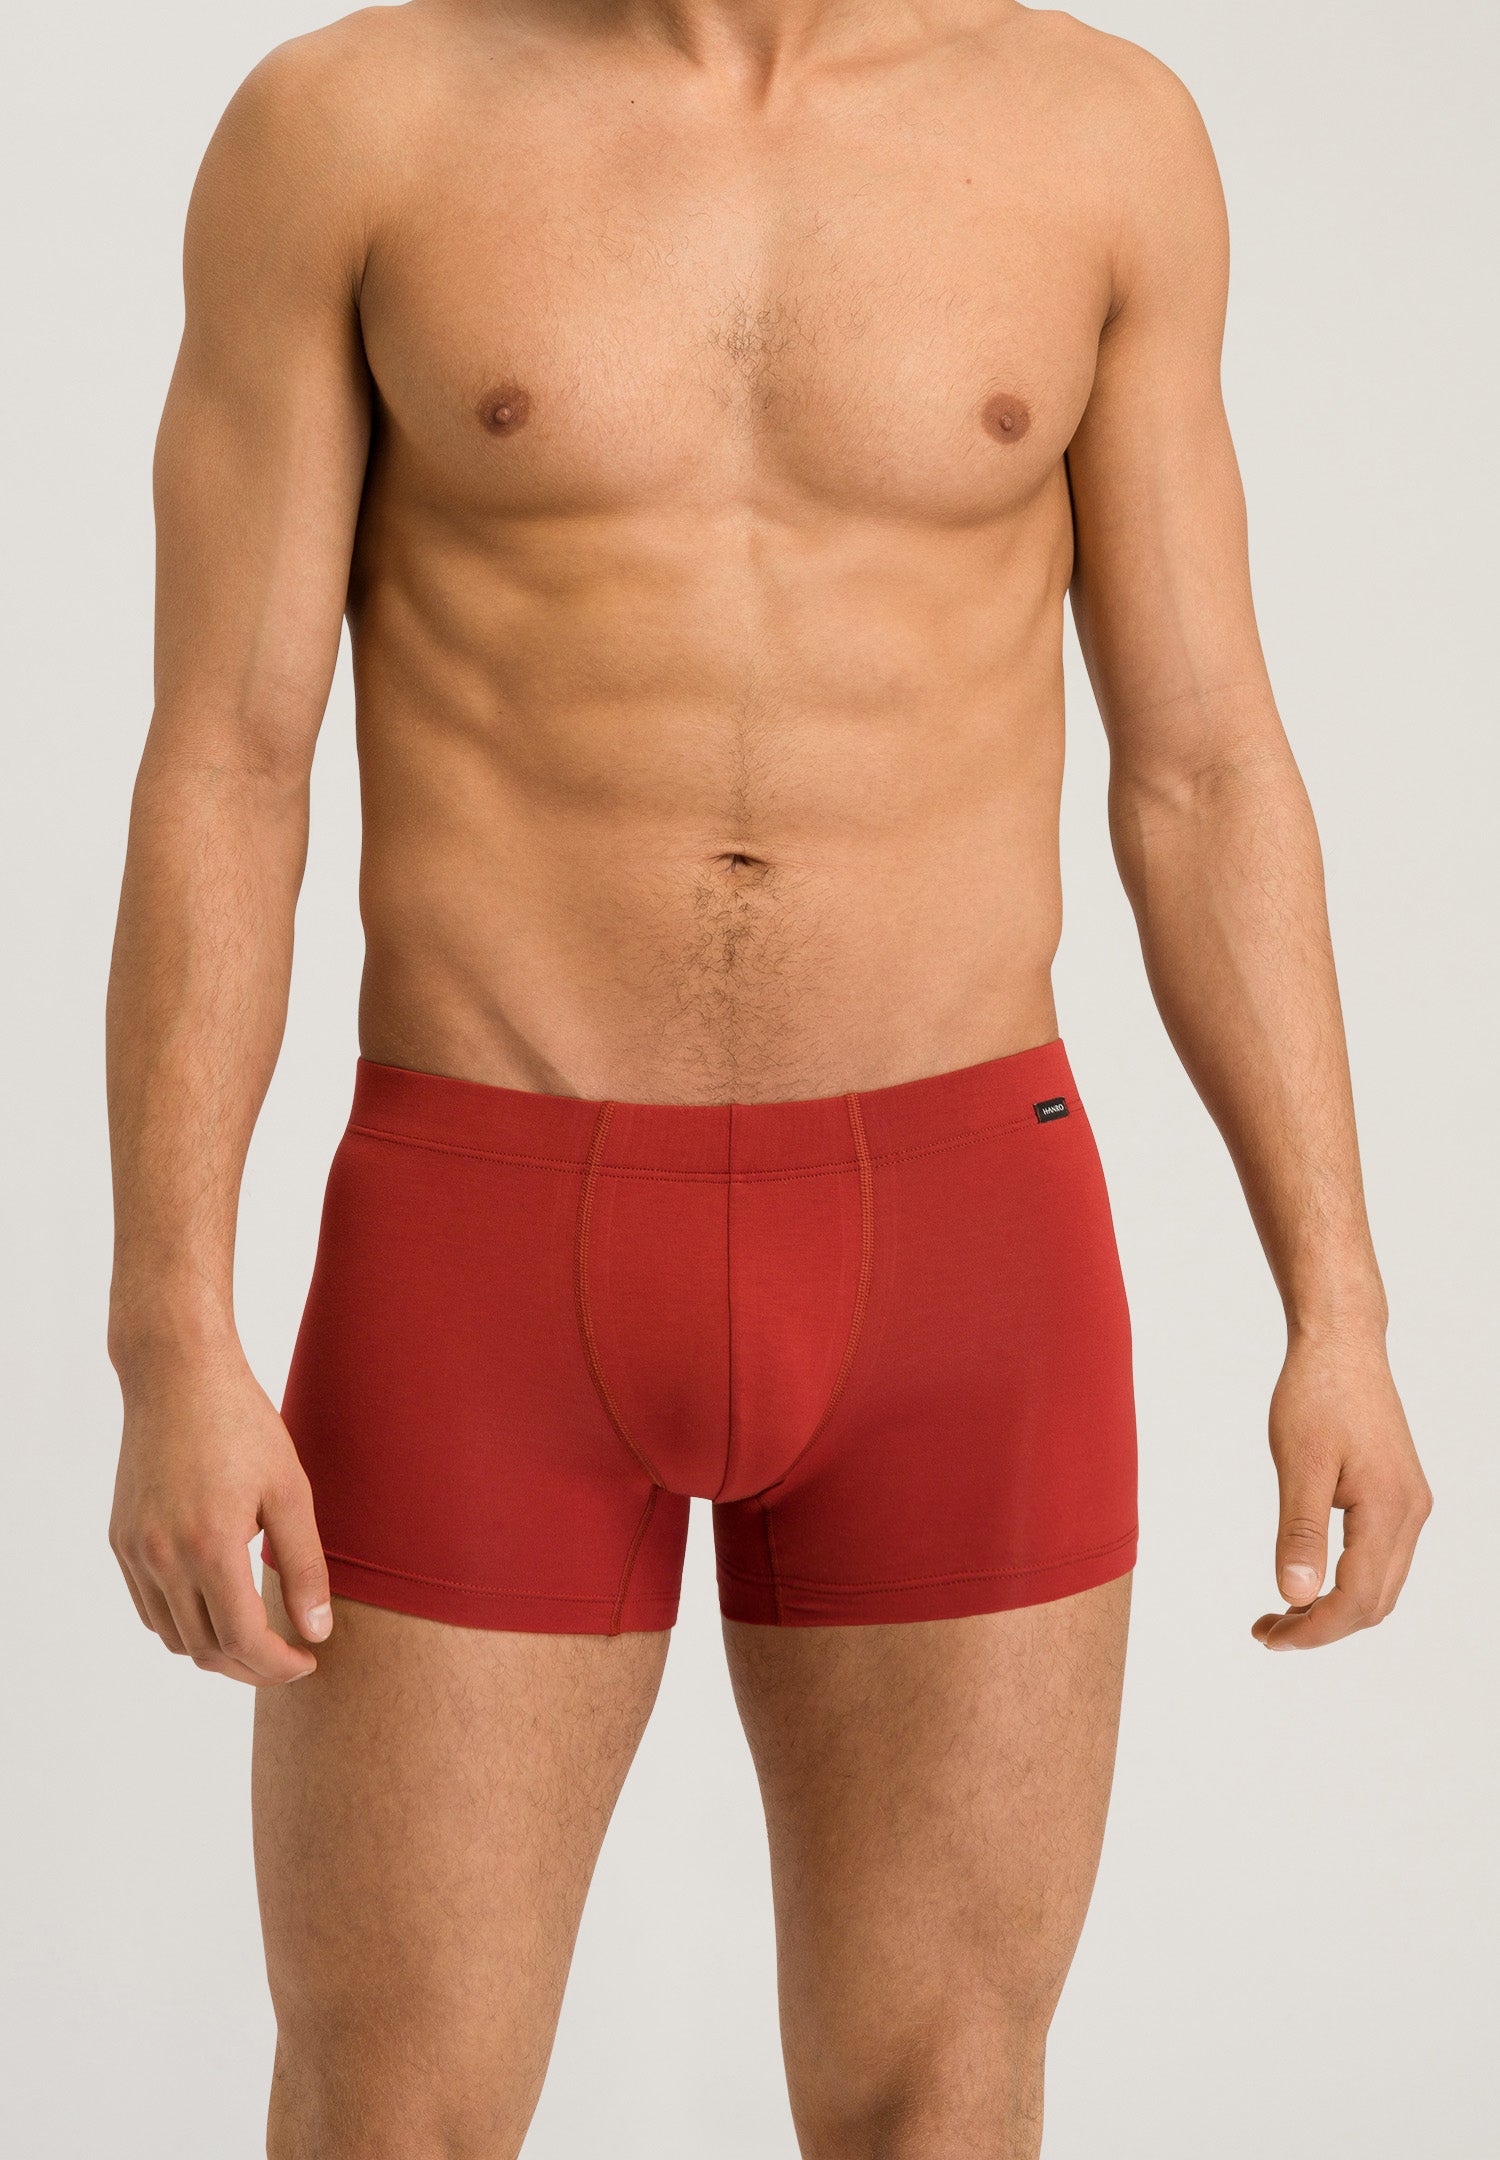 73079 Cotton Essentials 2 Pack Boxer Brief With Covered Waistband - 2157 Red Ochre/Fresh Grey